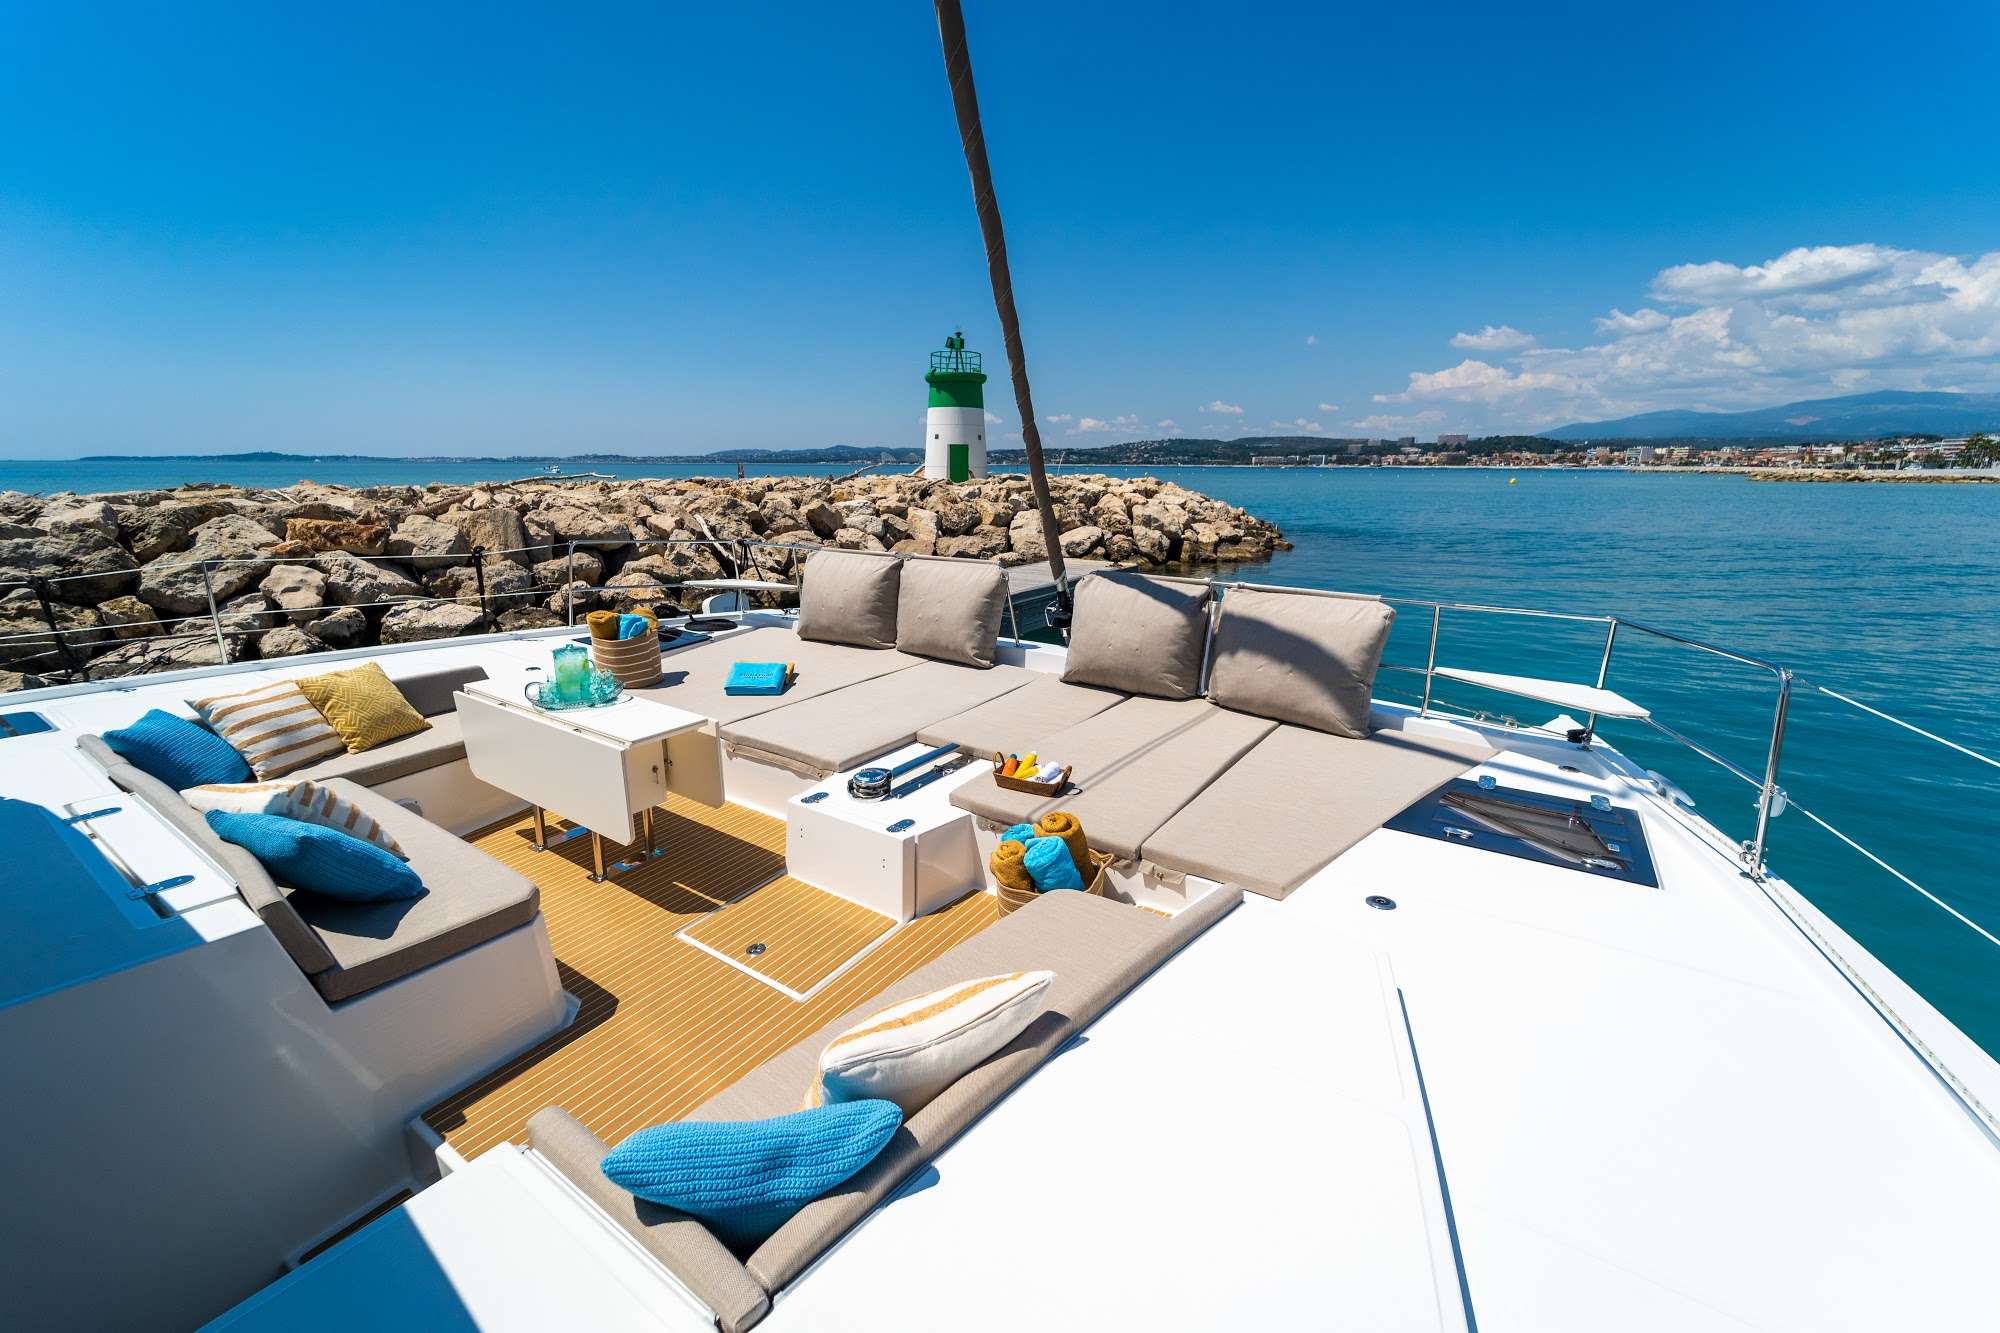 Signature Vision - Yacht Charter San Salvo Marina & Boat hire in Europe (Spain, France, Italy) 4